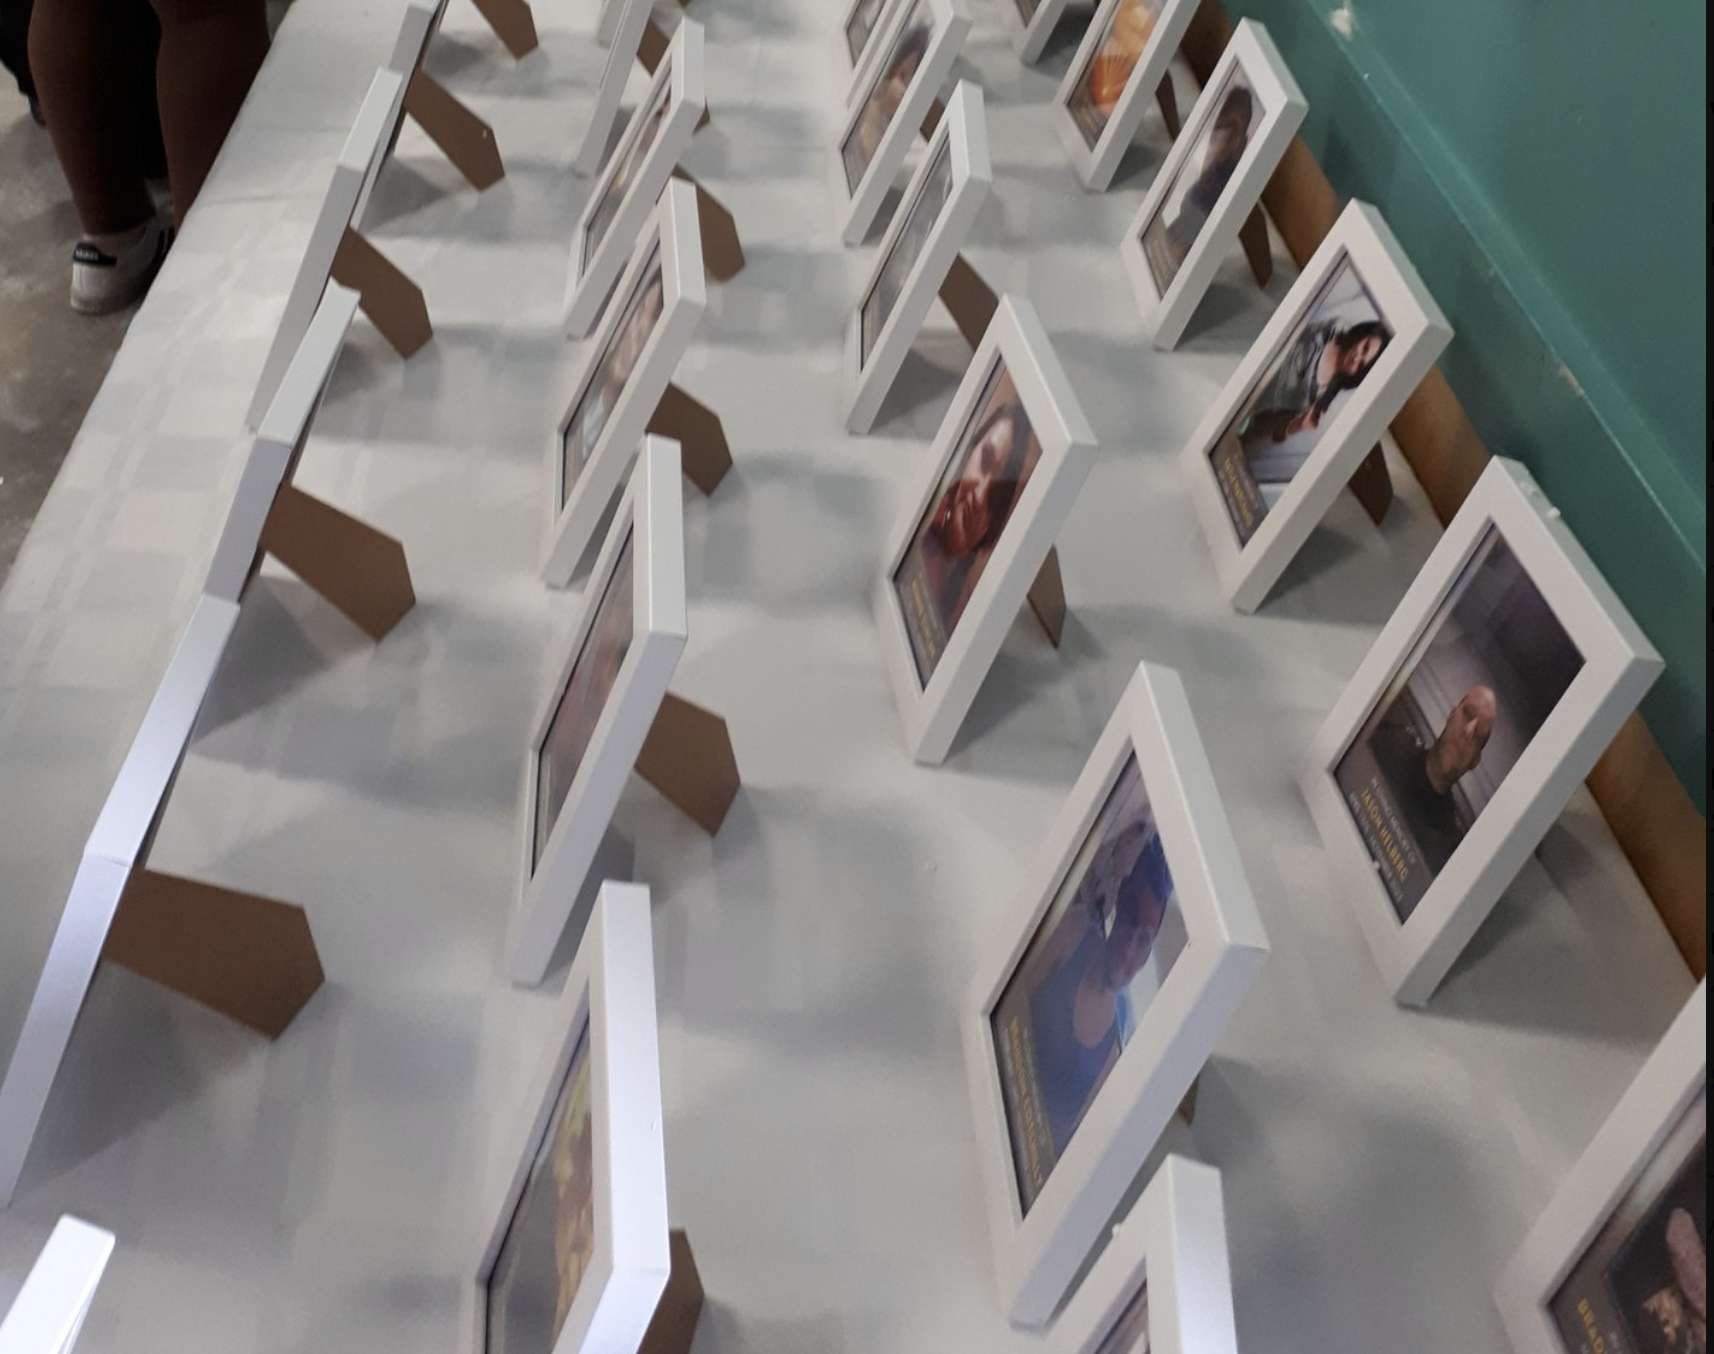 20 photos of people mounted in white frames on a long white table, in 4 rows.